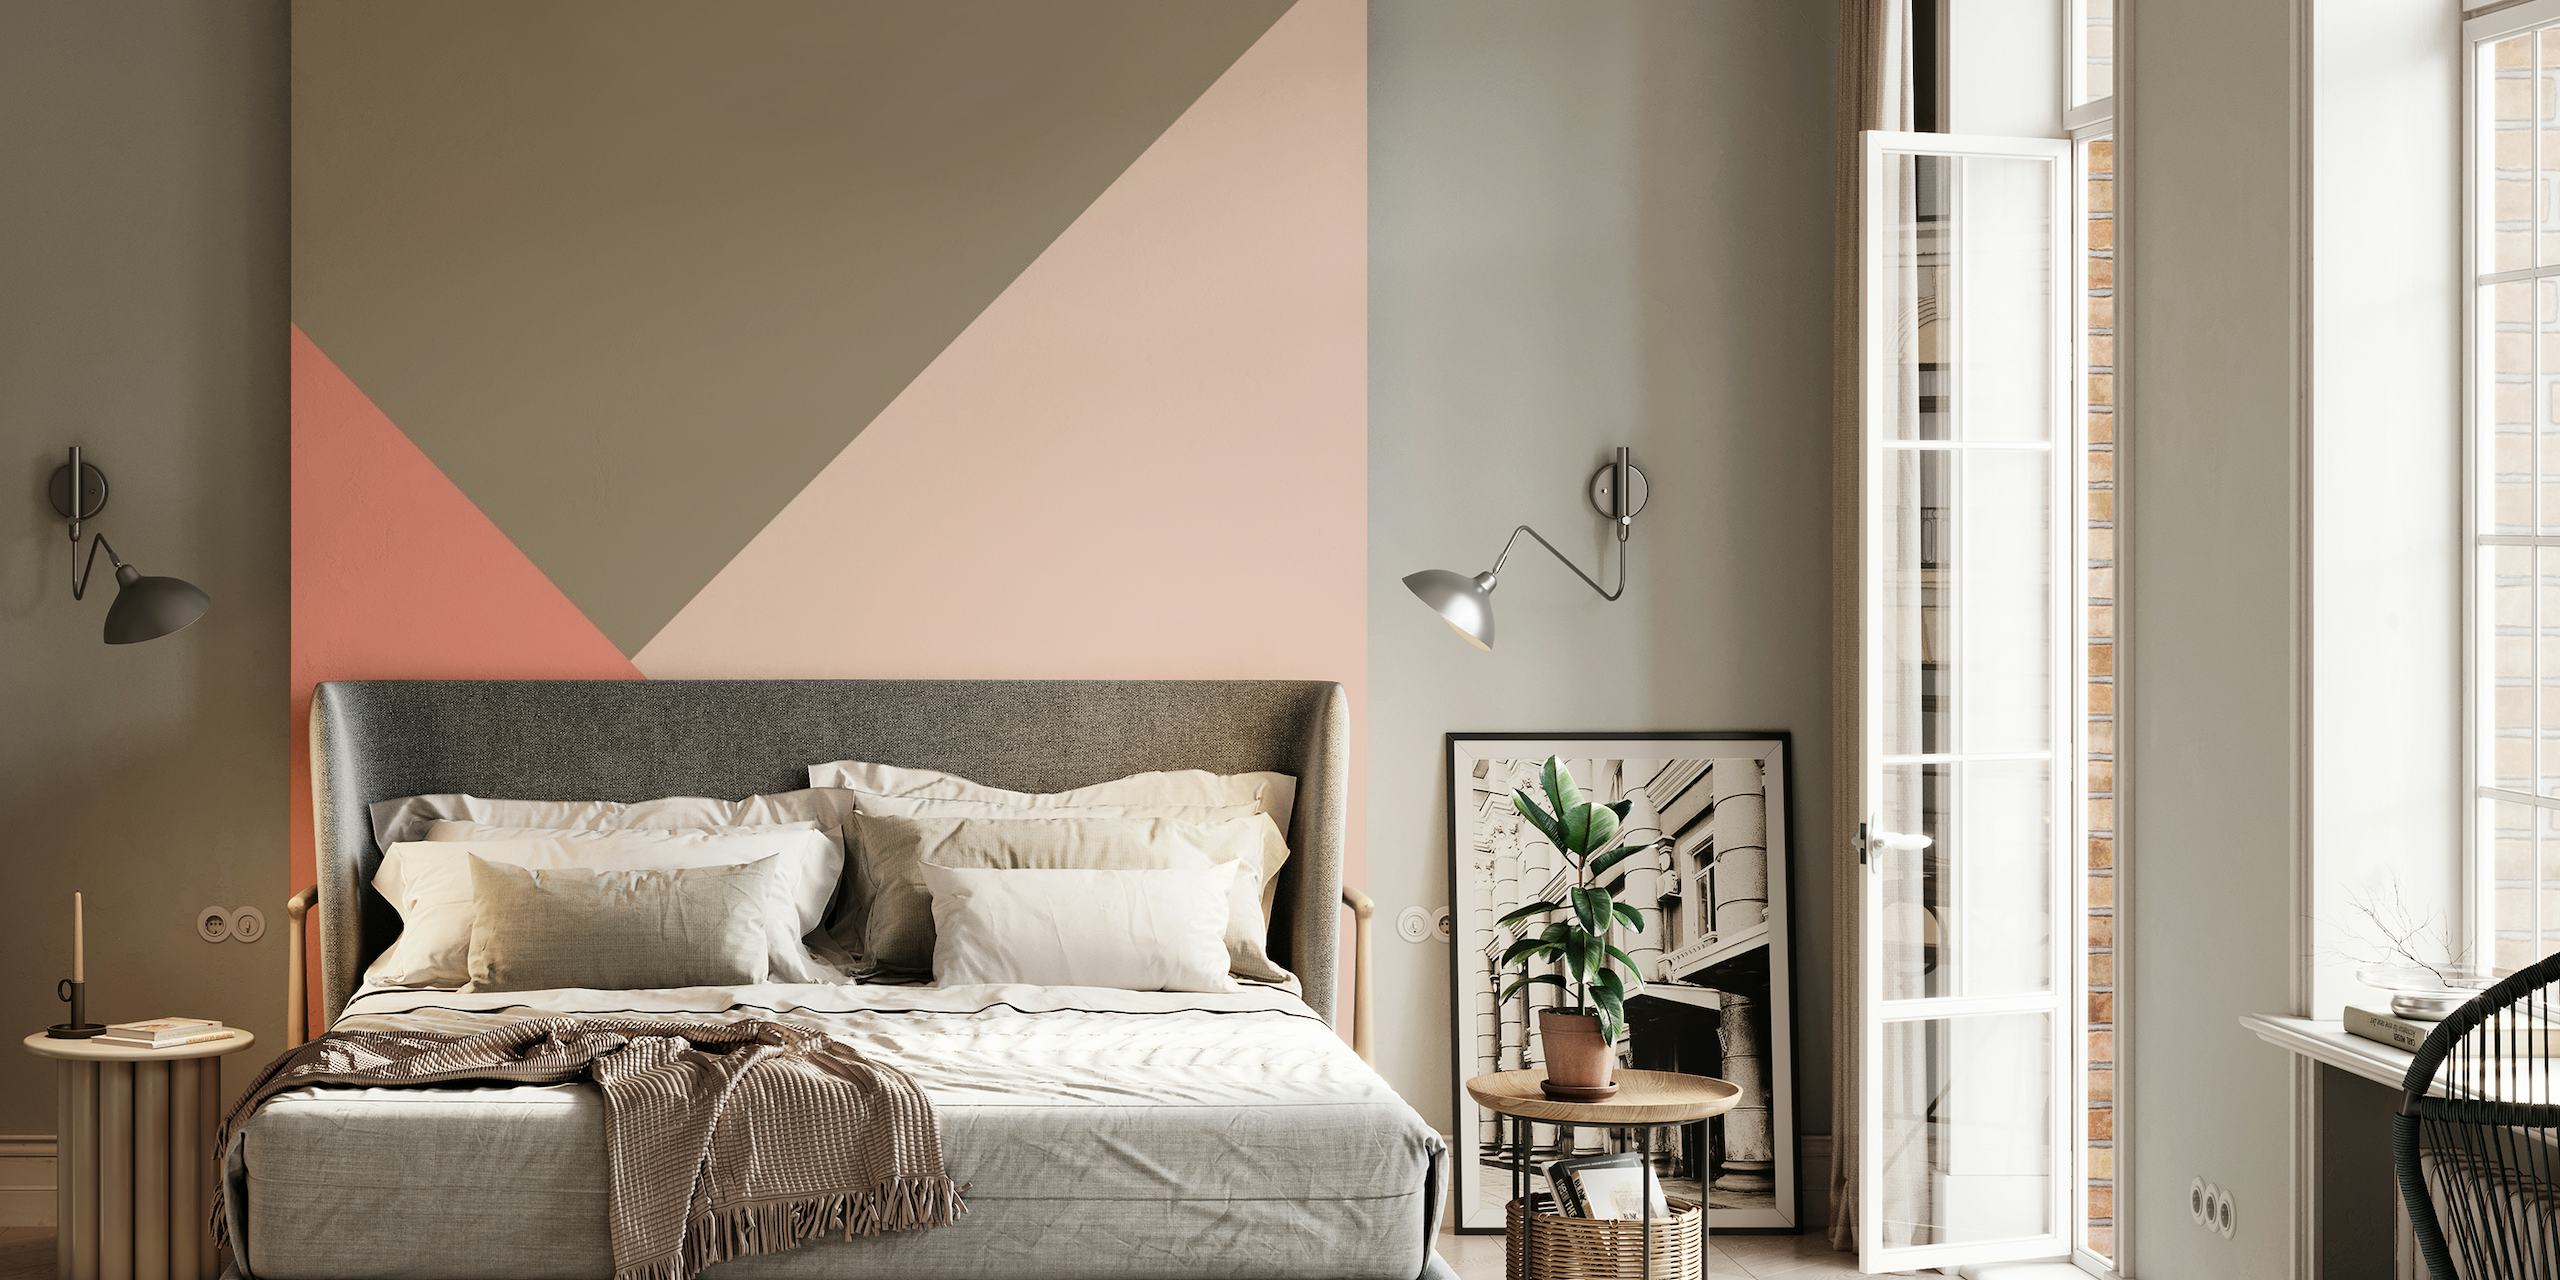 Geometric Summer Glam 3 wall mural with terracotta and taupe hues